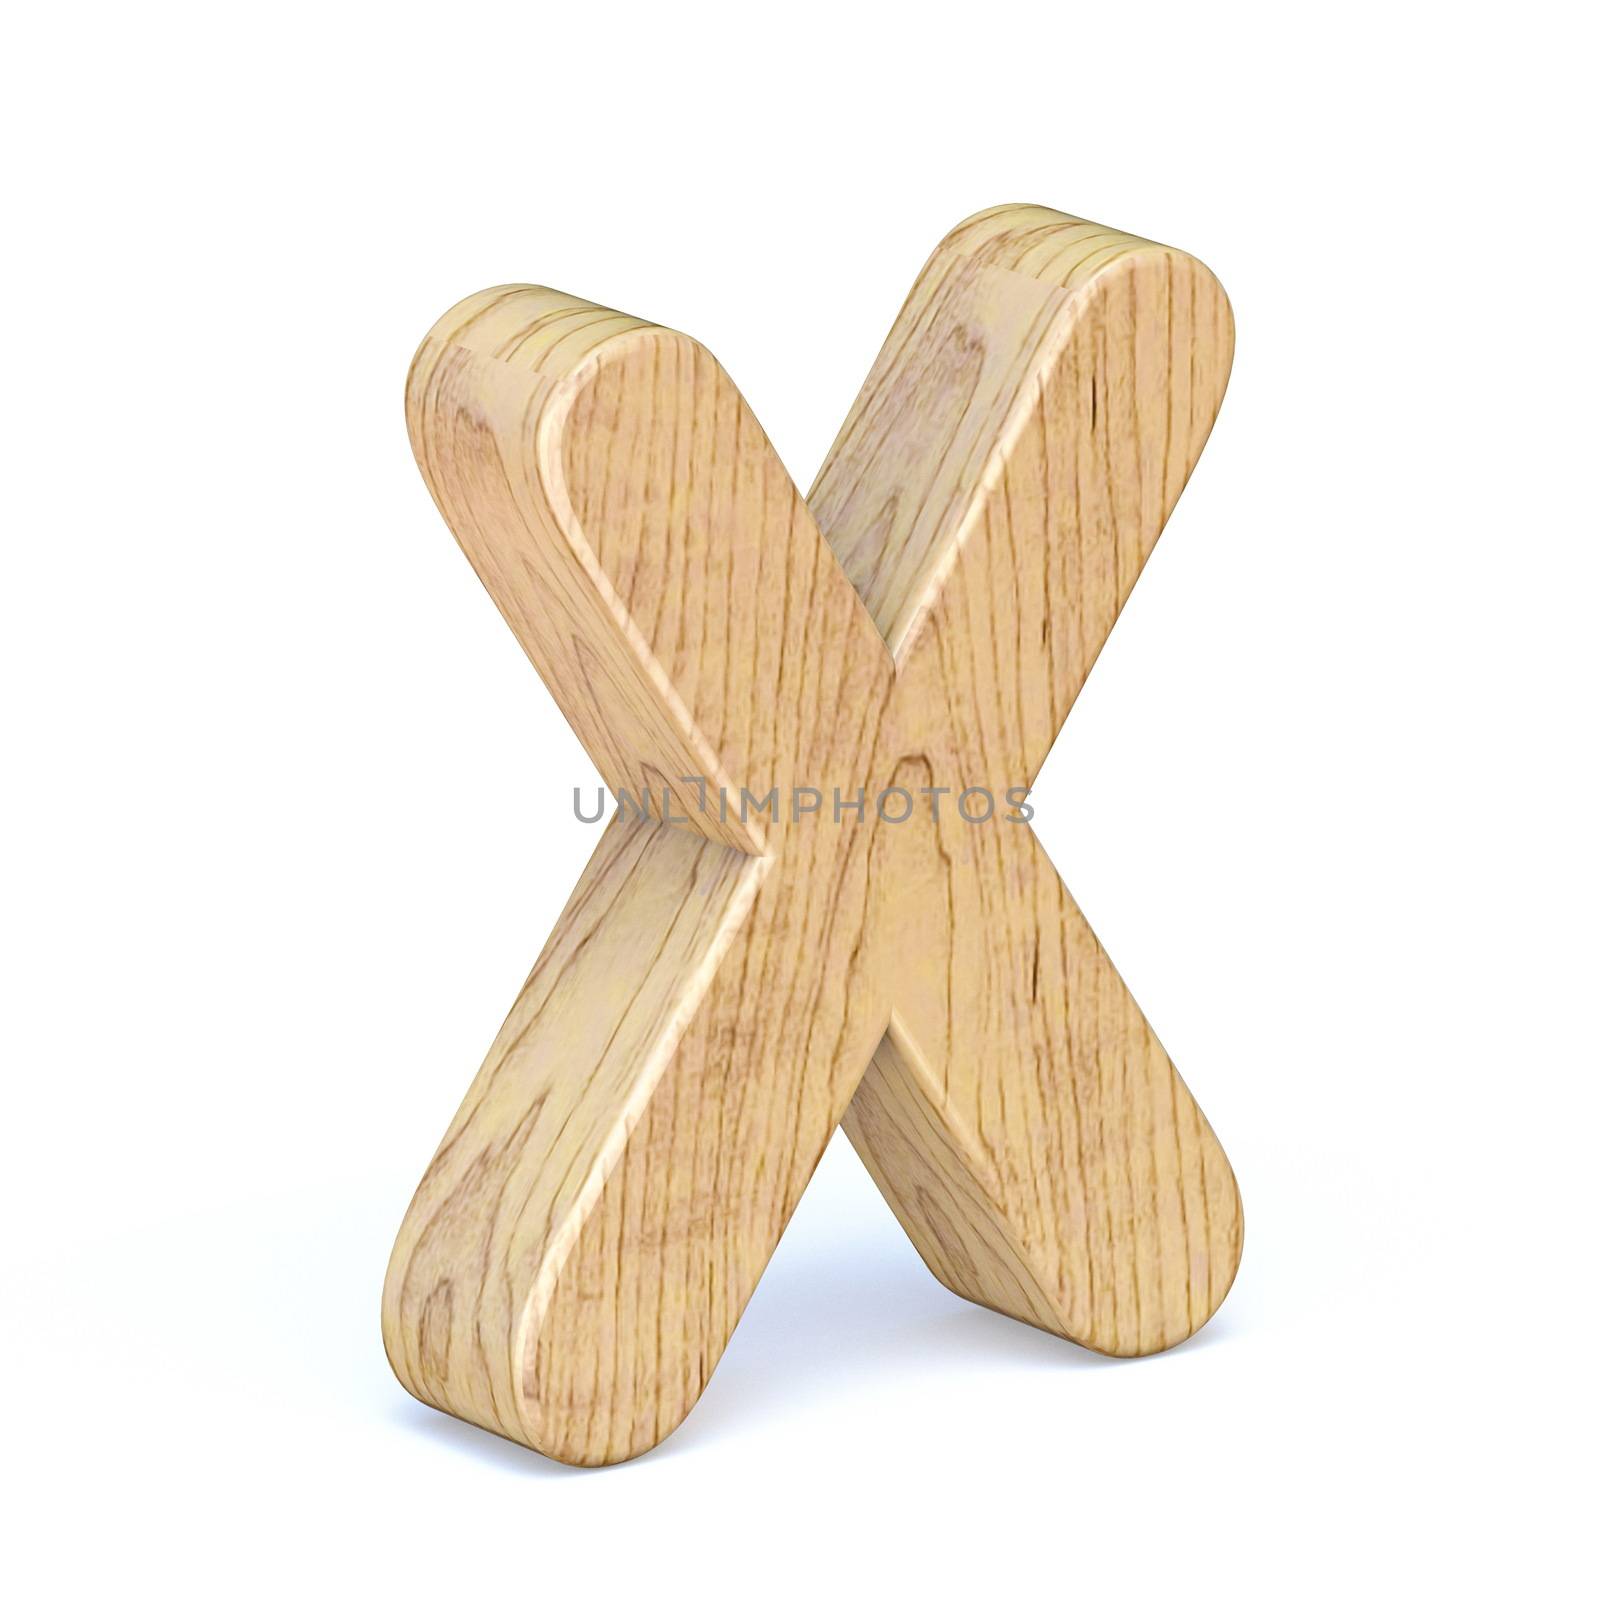 Rounded wooden font Letter X 3D by djmilic